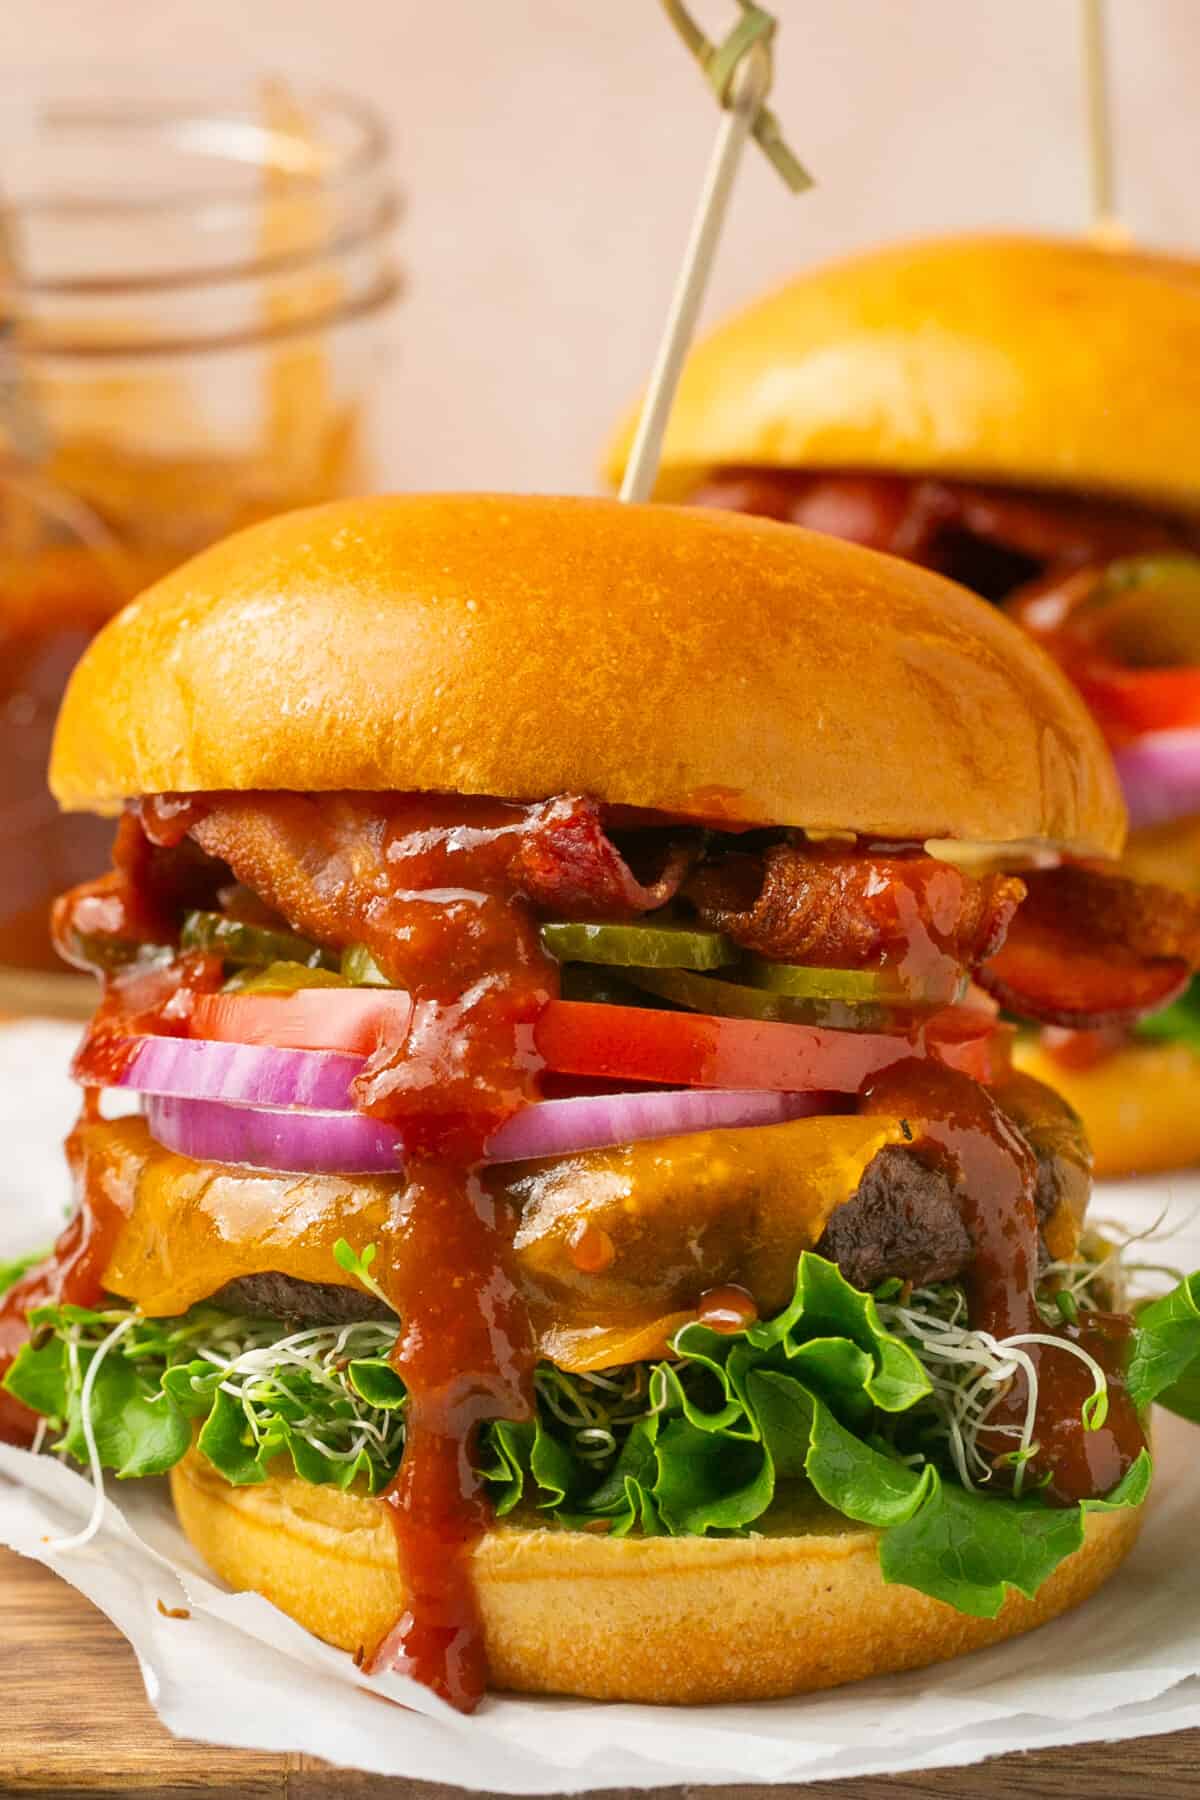 Close up shot of an assembled burgers with lettuce, sprouts, tomato, onion, pickles, cheese burger patties, bacon and homemade bbq sauce on brioche buns.